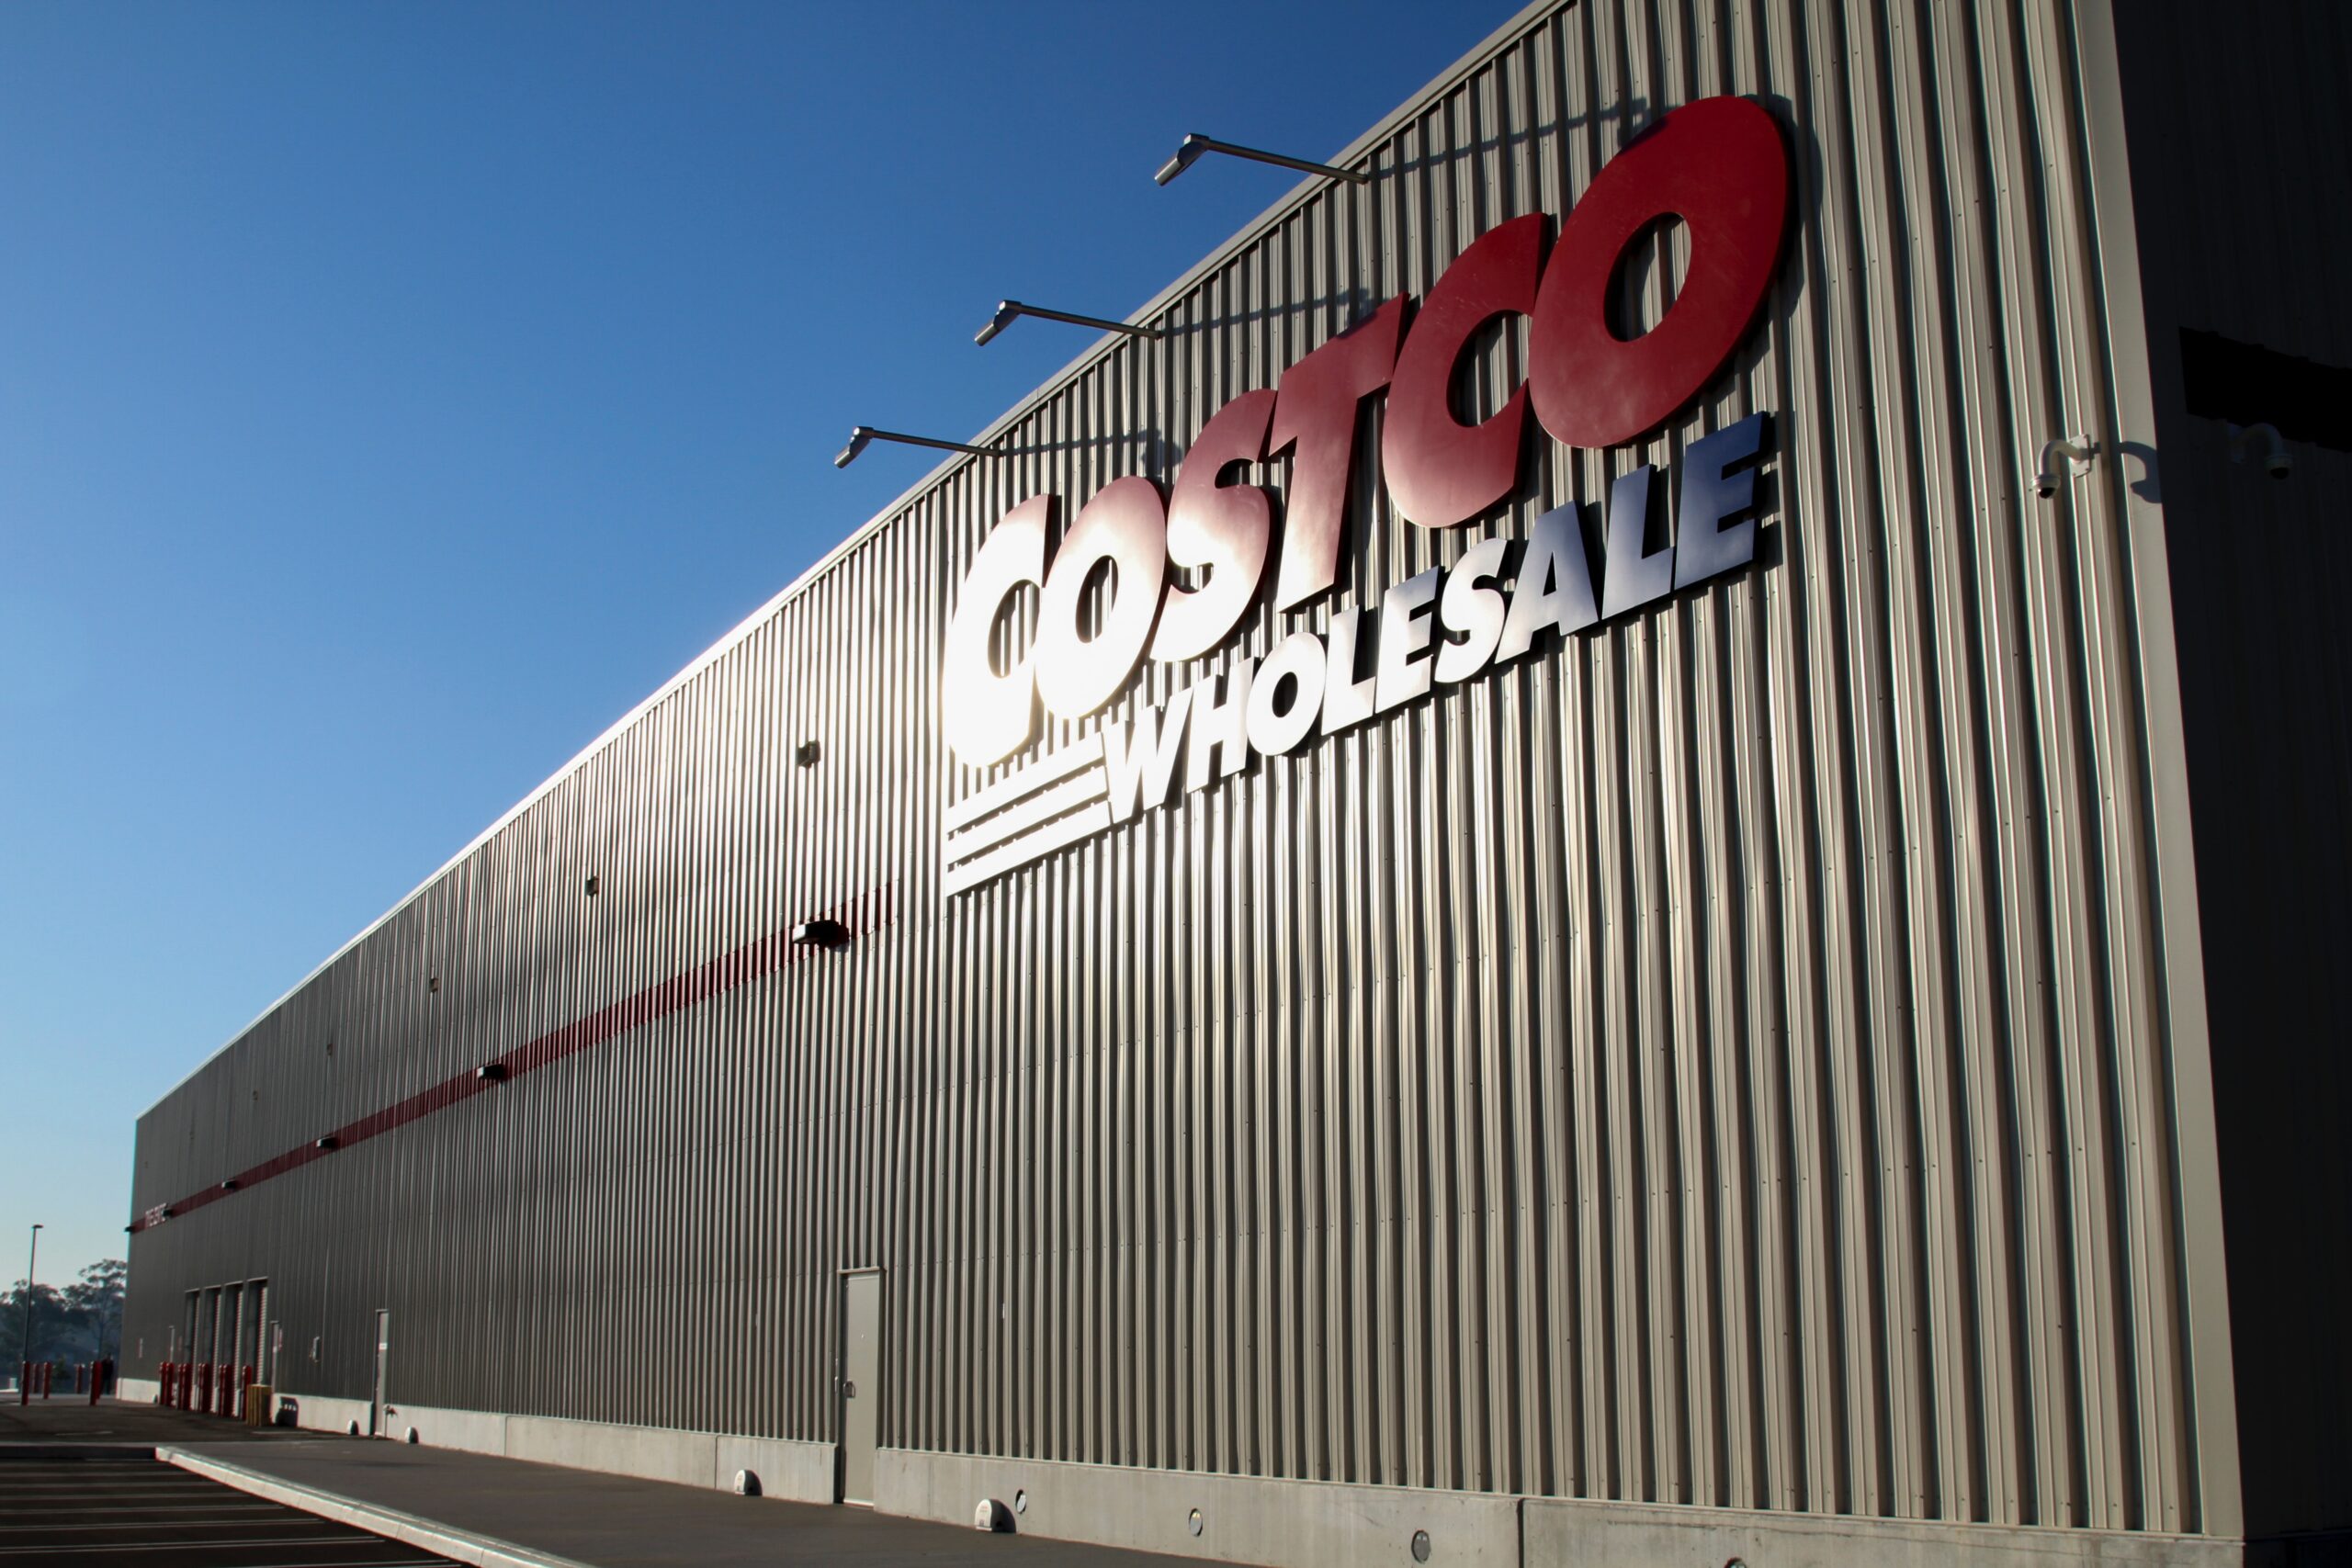 Exterior of a Costco Wholesale warehouse